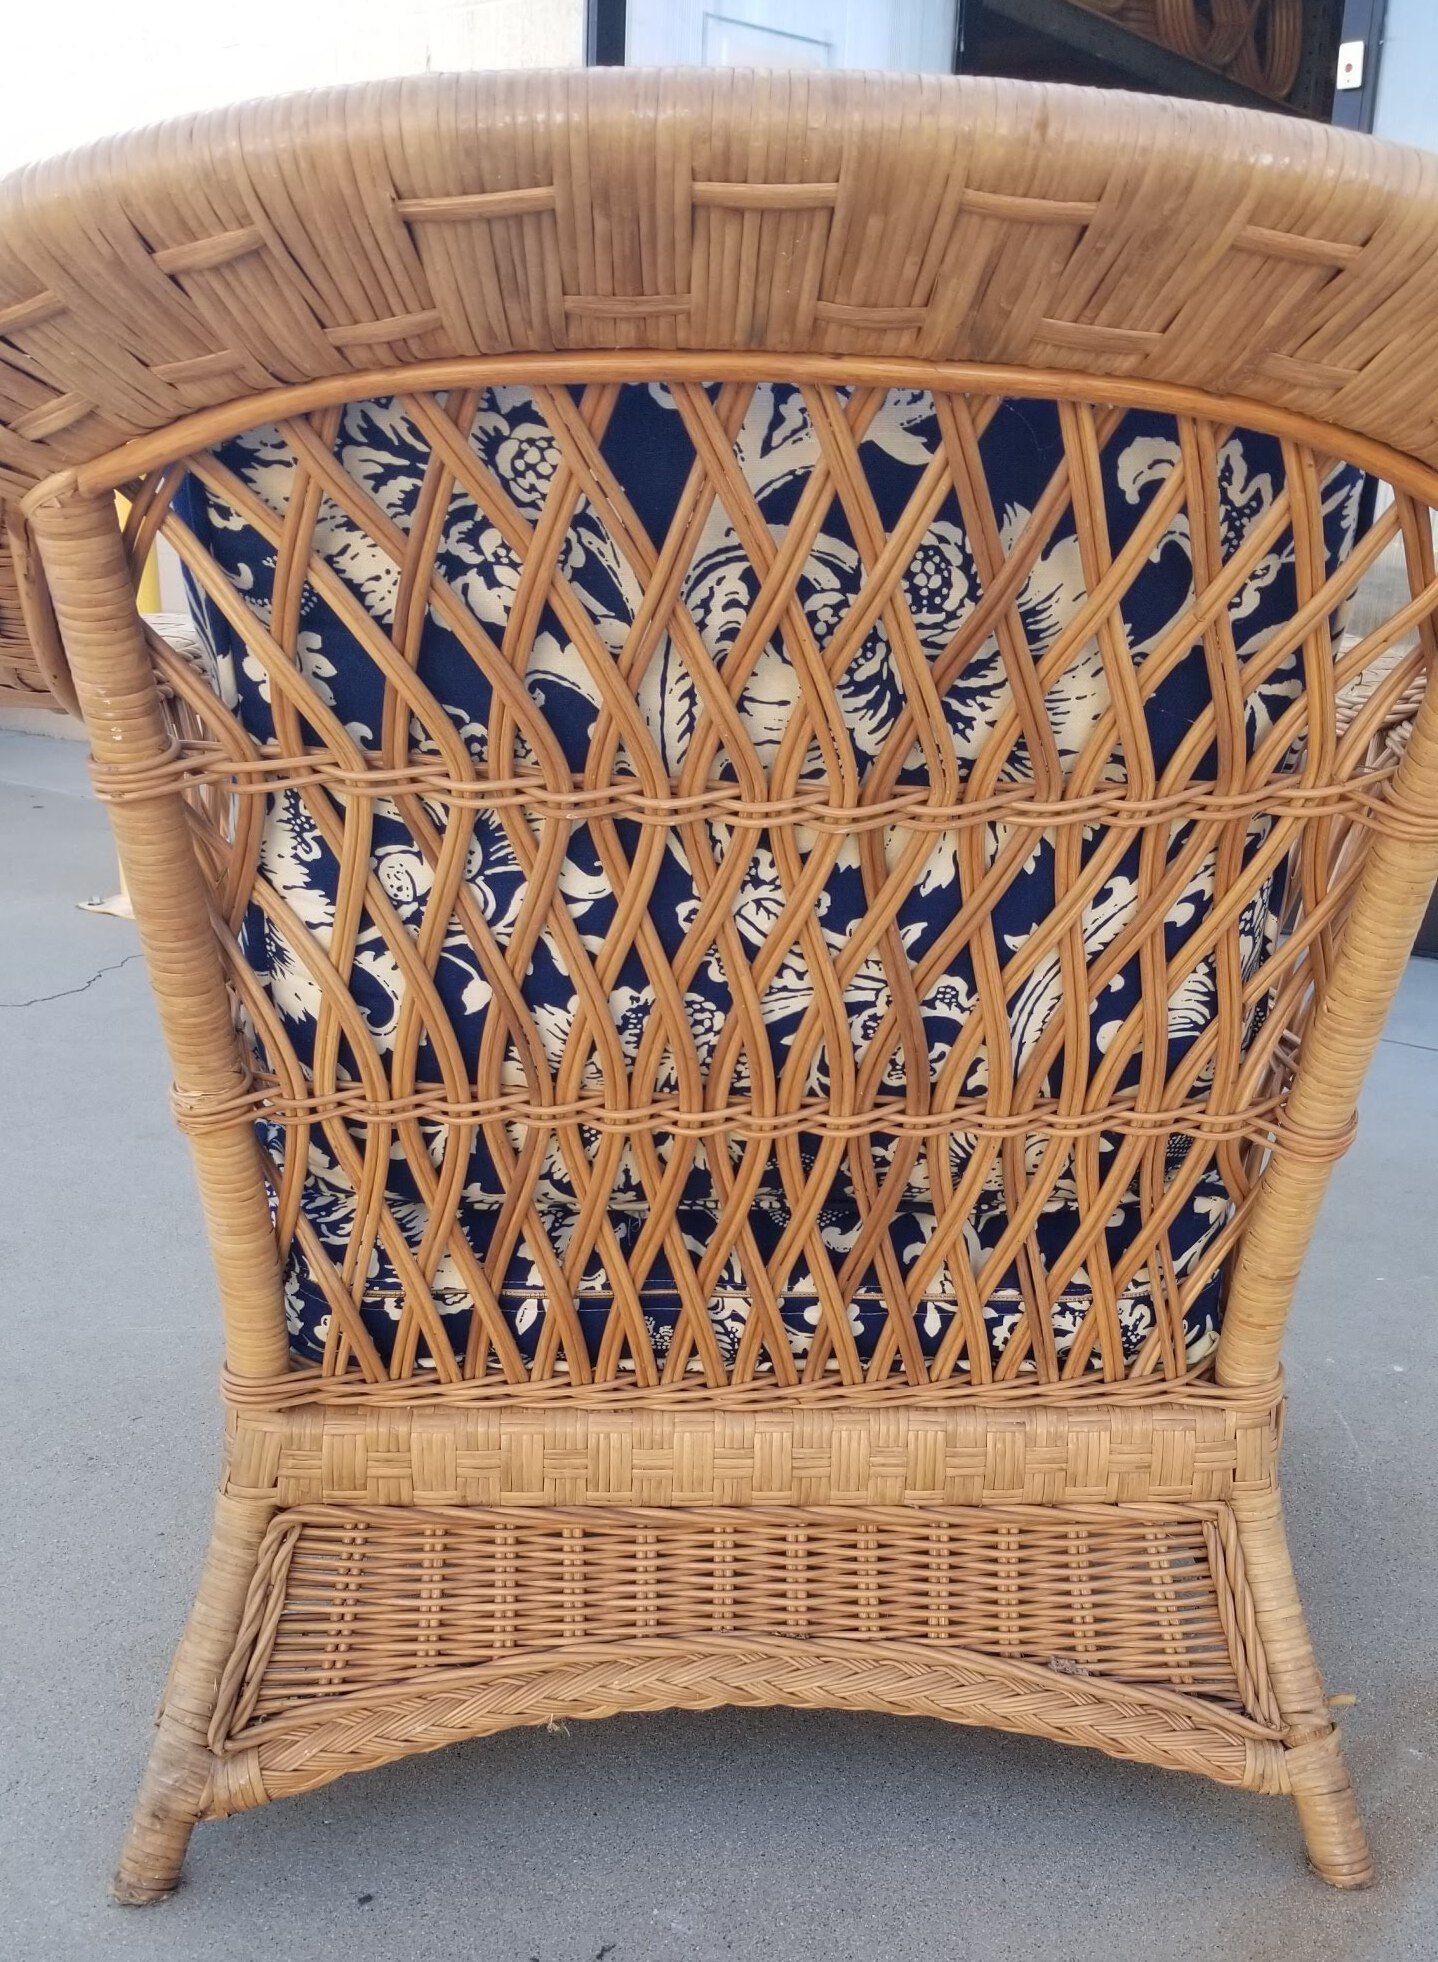 This restored rattan wicker lounge chair is a stunning piece of furniture with intricate lattice woven sides. It's timeless design exudes vintage charm and comfort, making it an ideal addition to any home or outdoor space.

Included in the price is